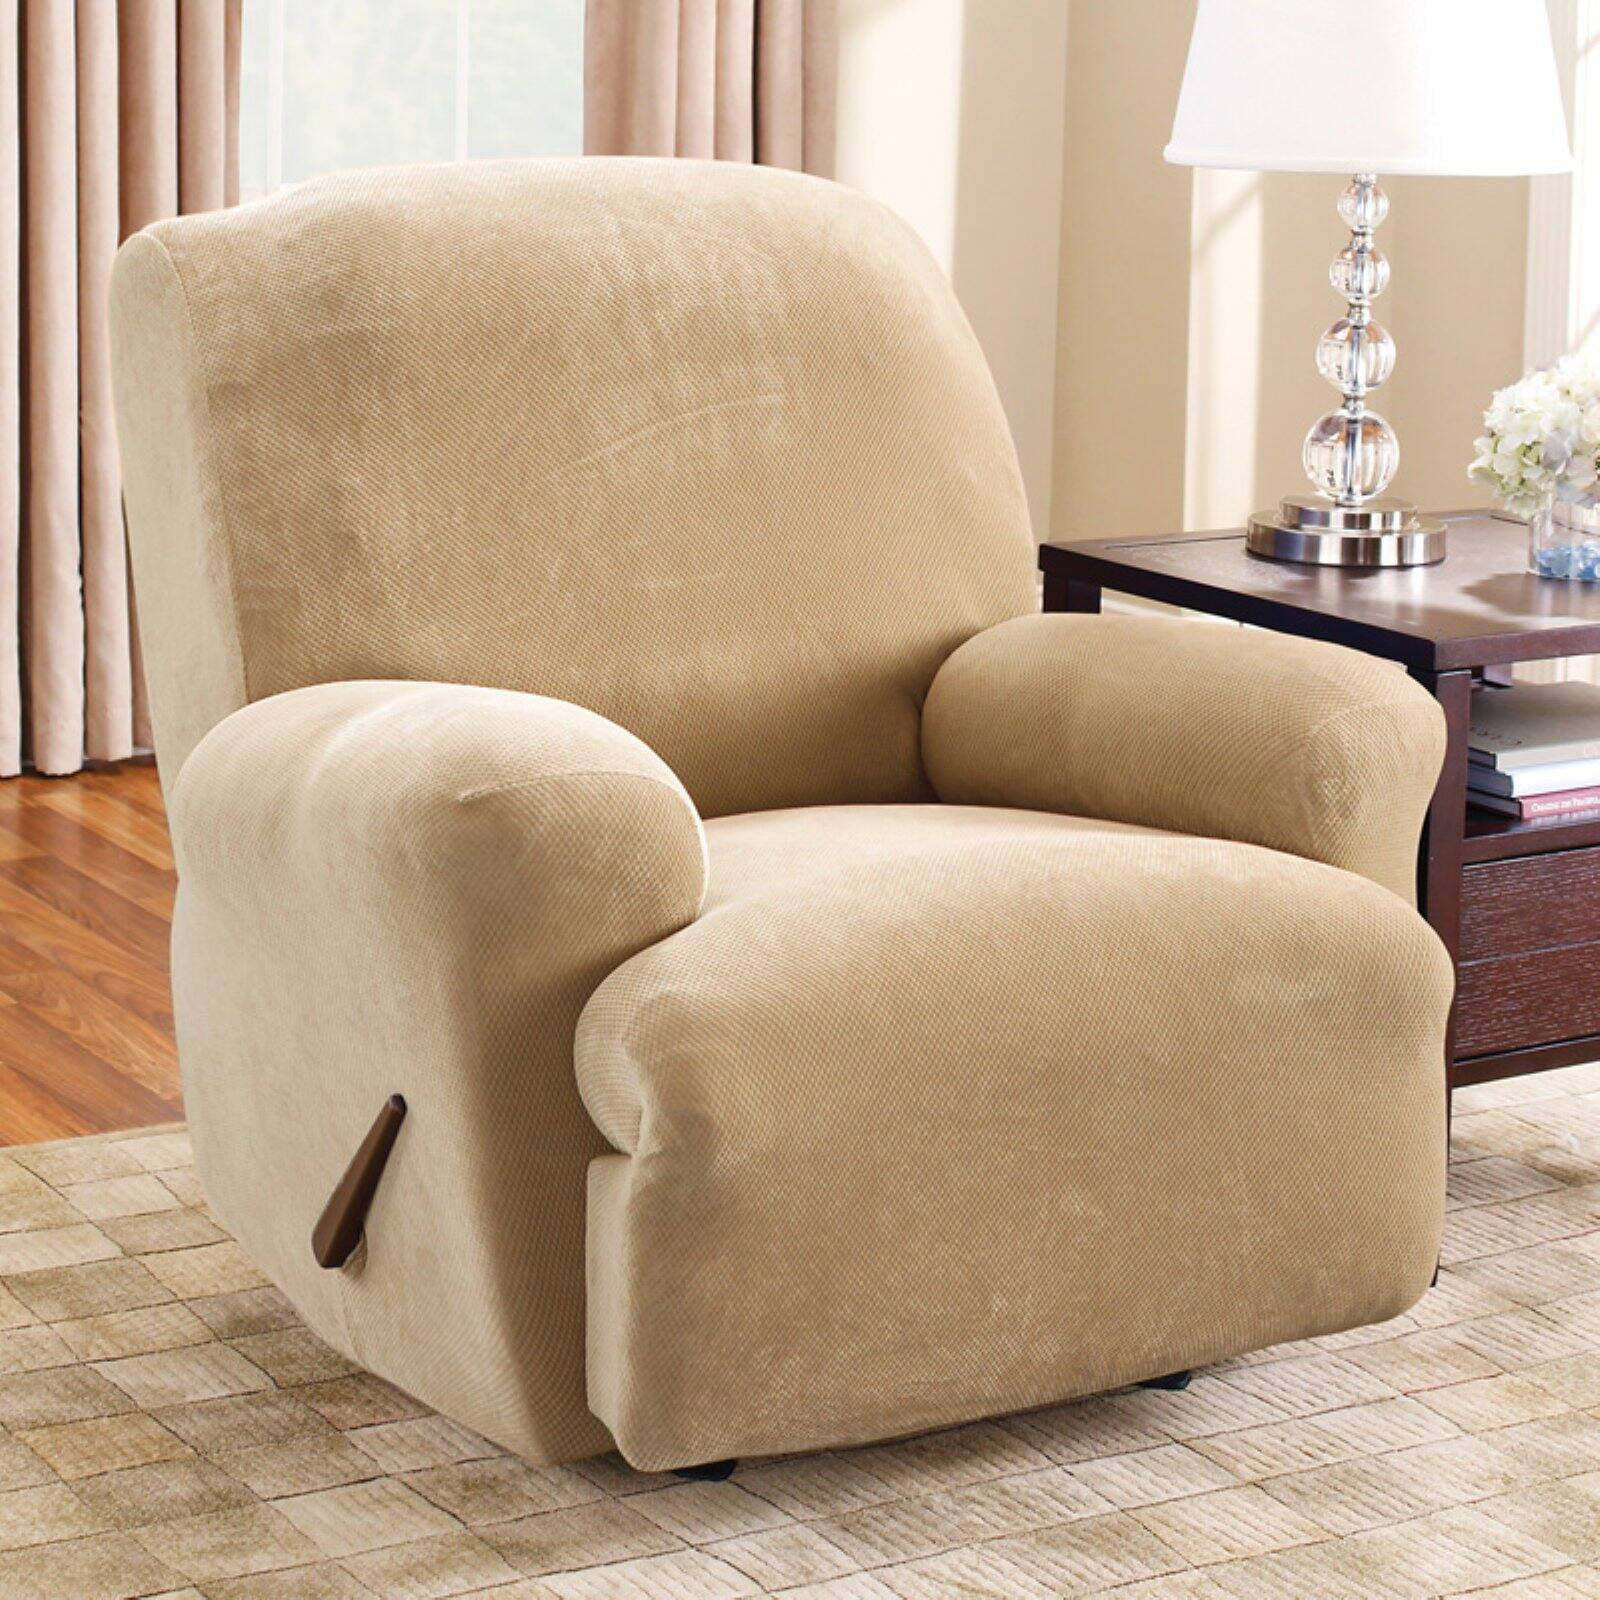 NEW Textured Pique Recliner Furniture Cover Chocolate 